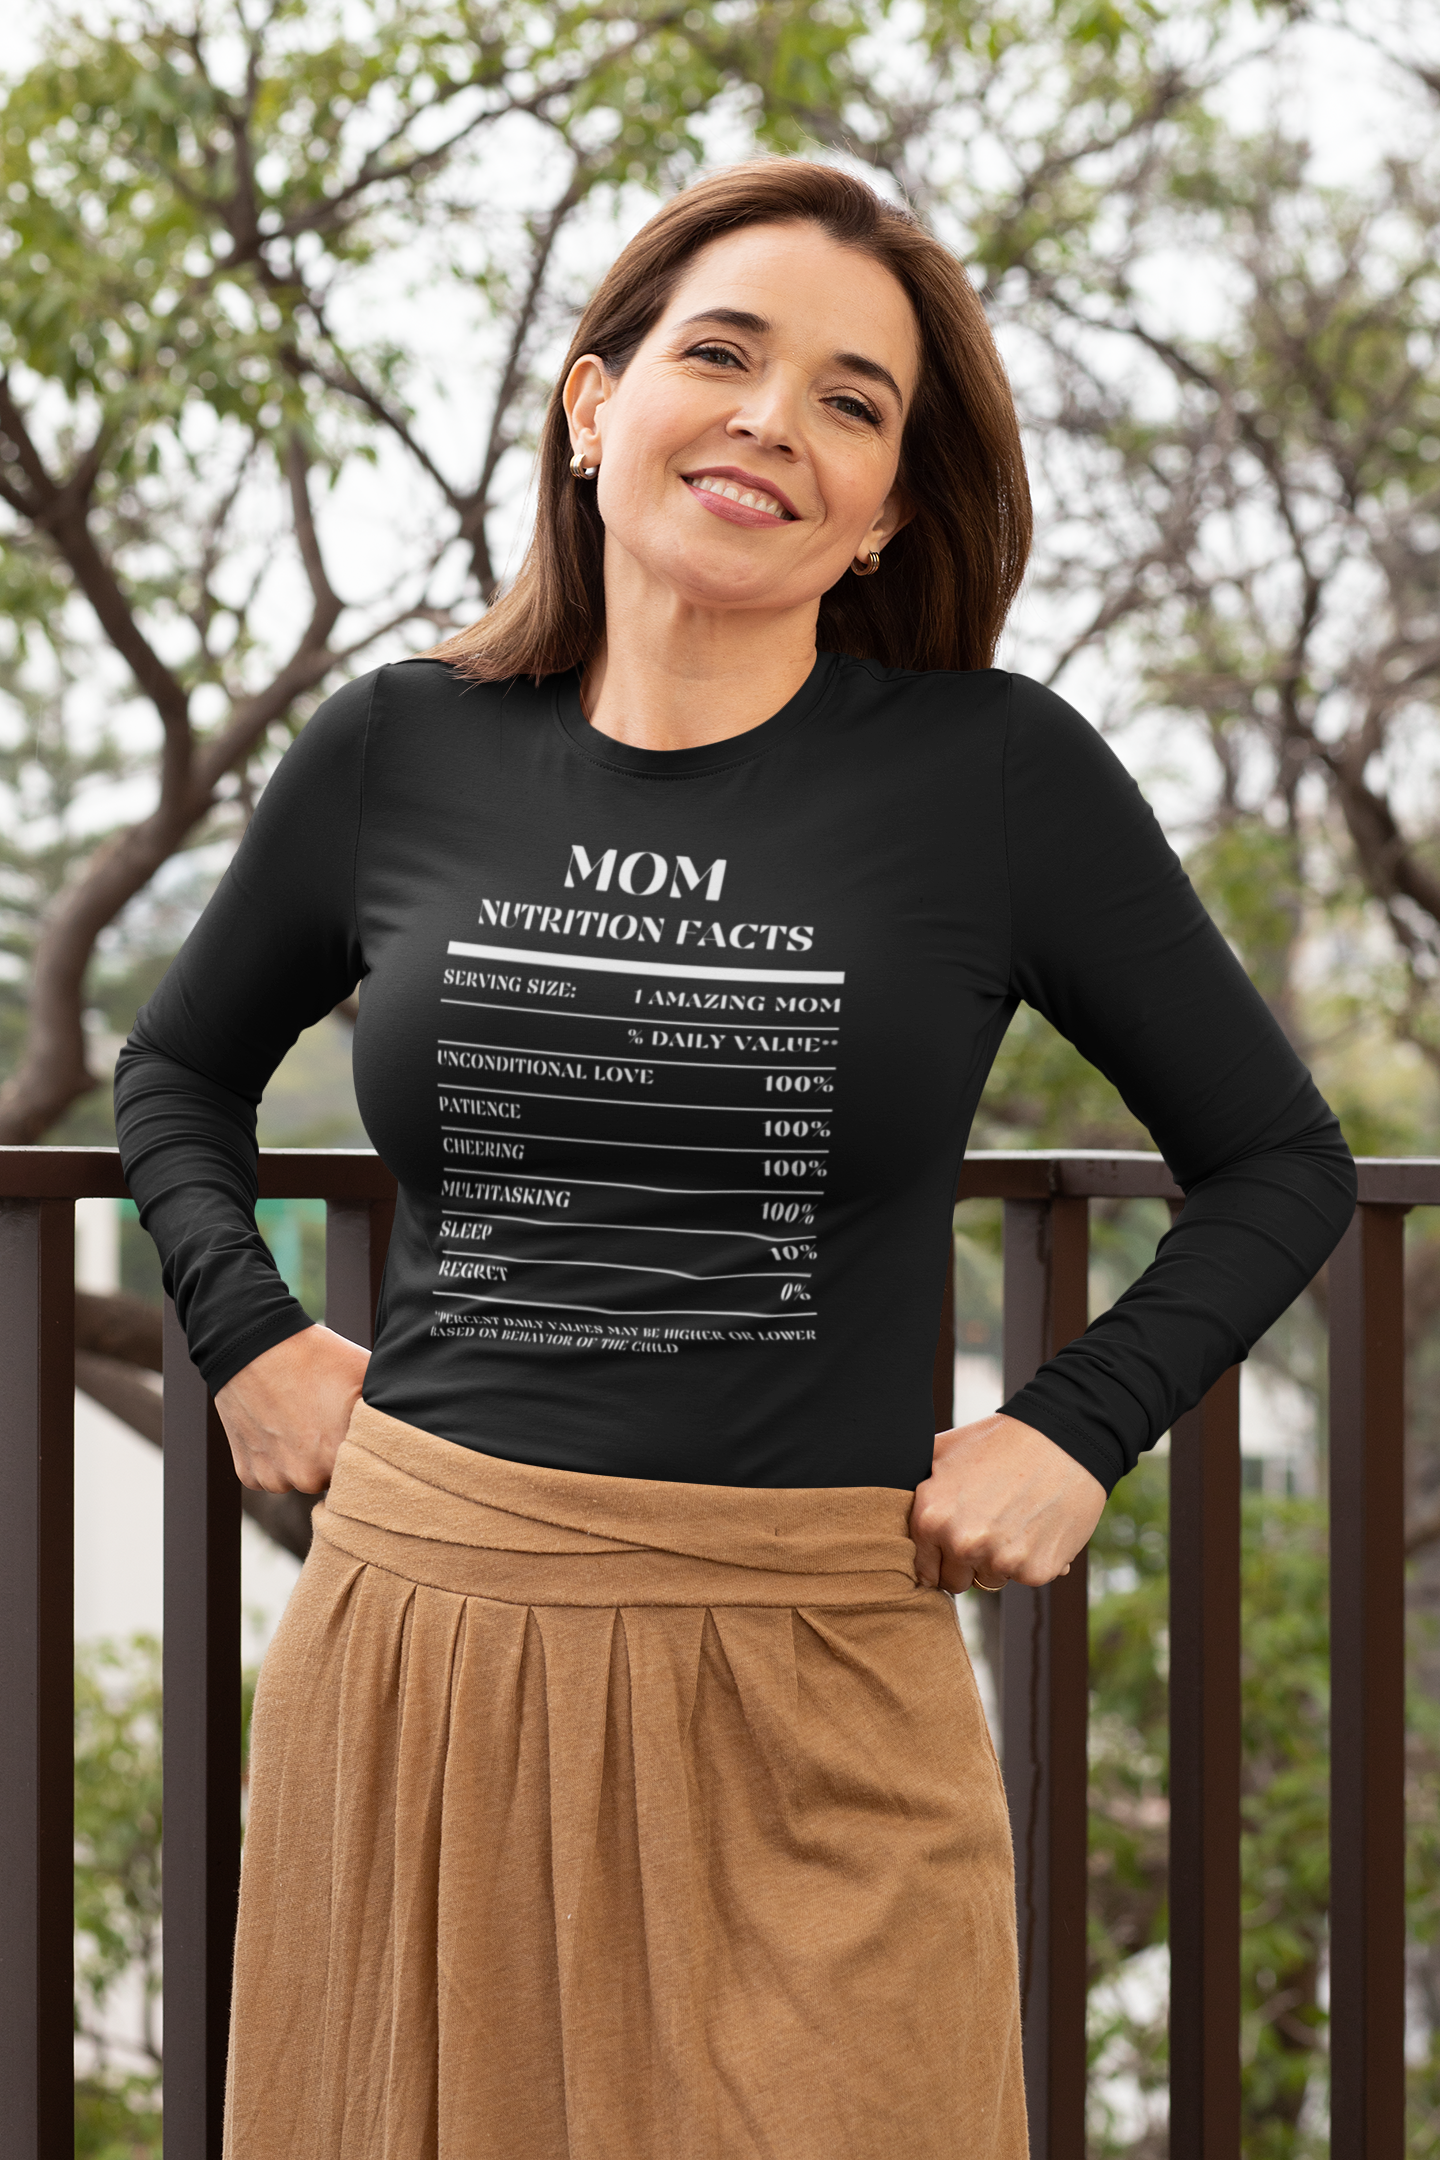 Nutrition Facts T-Shirt LS - Mom - White